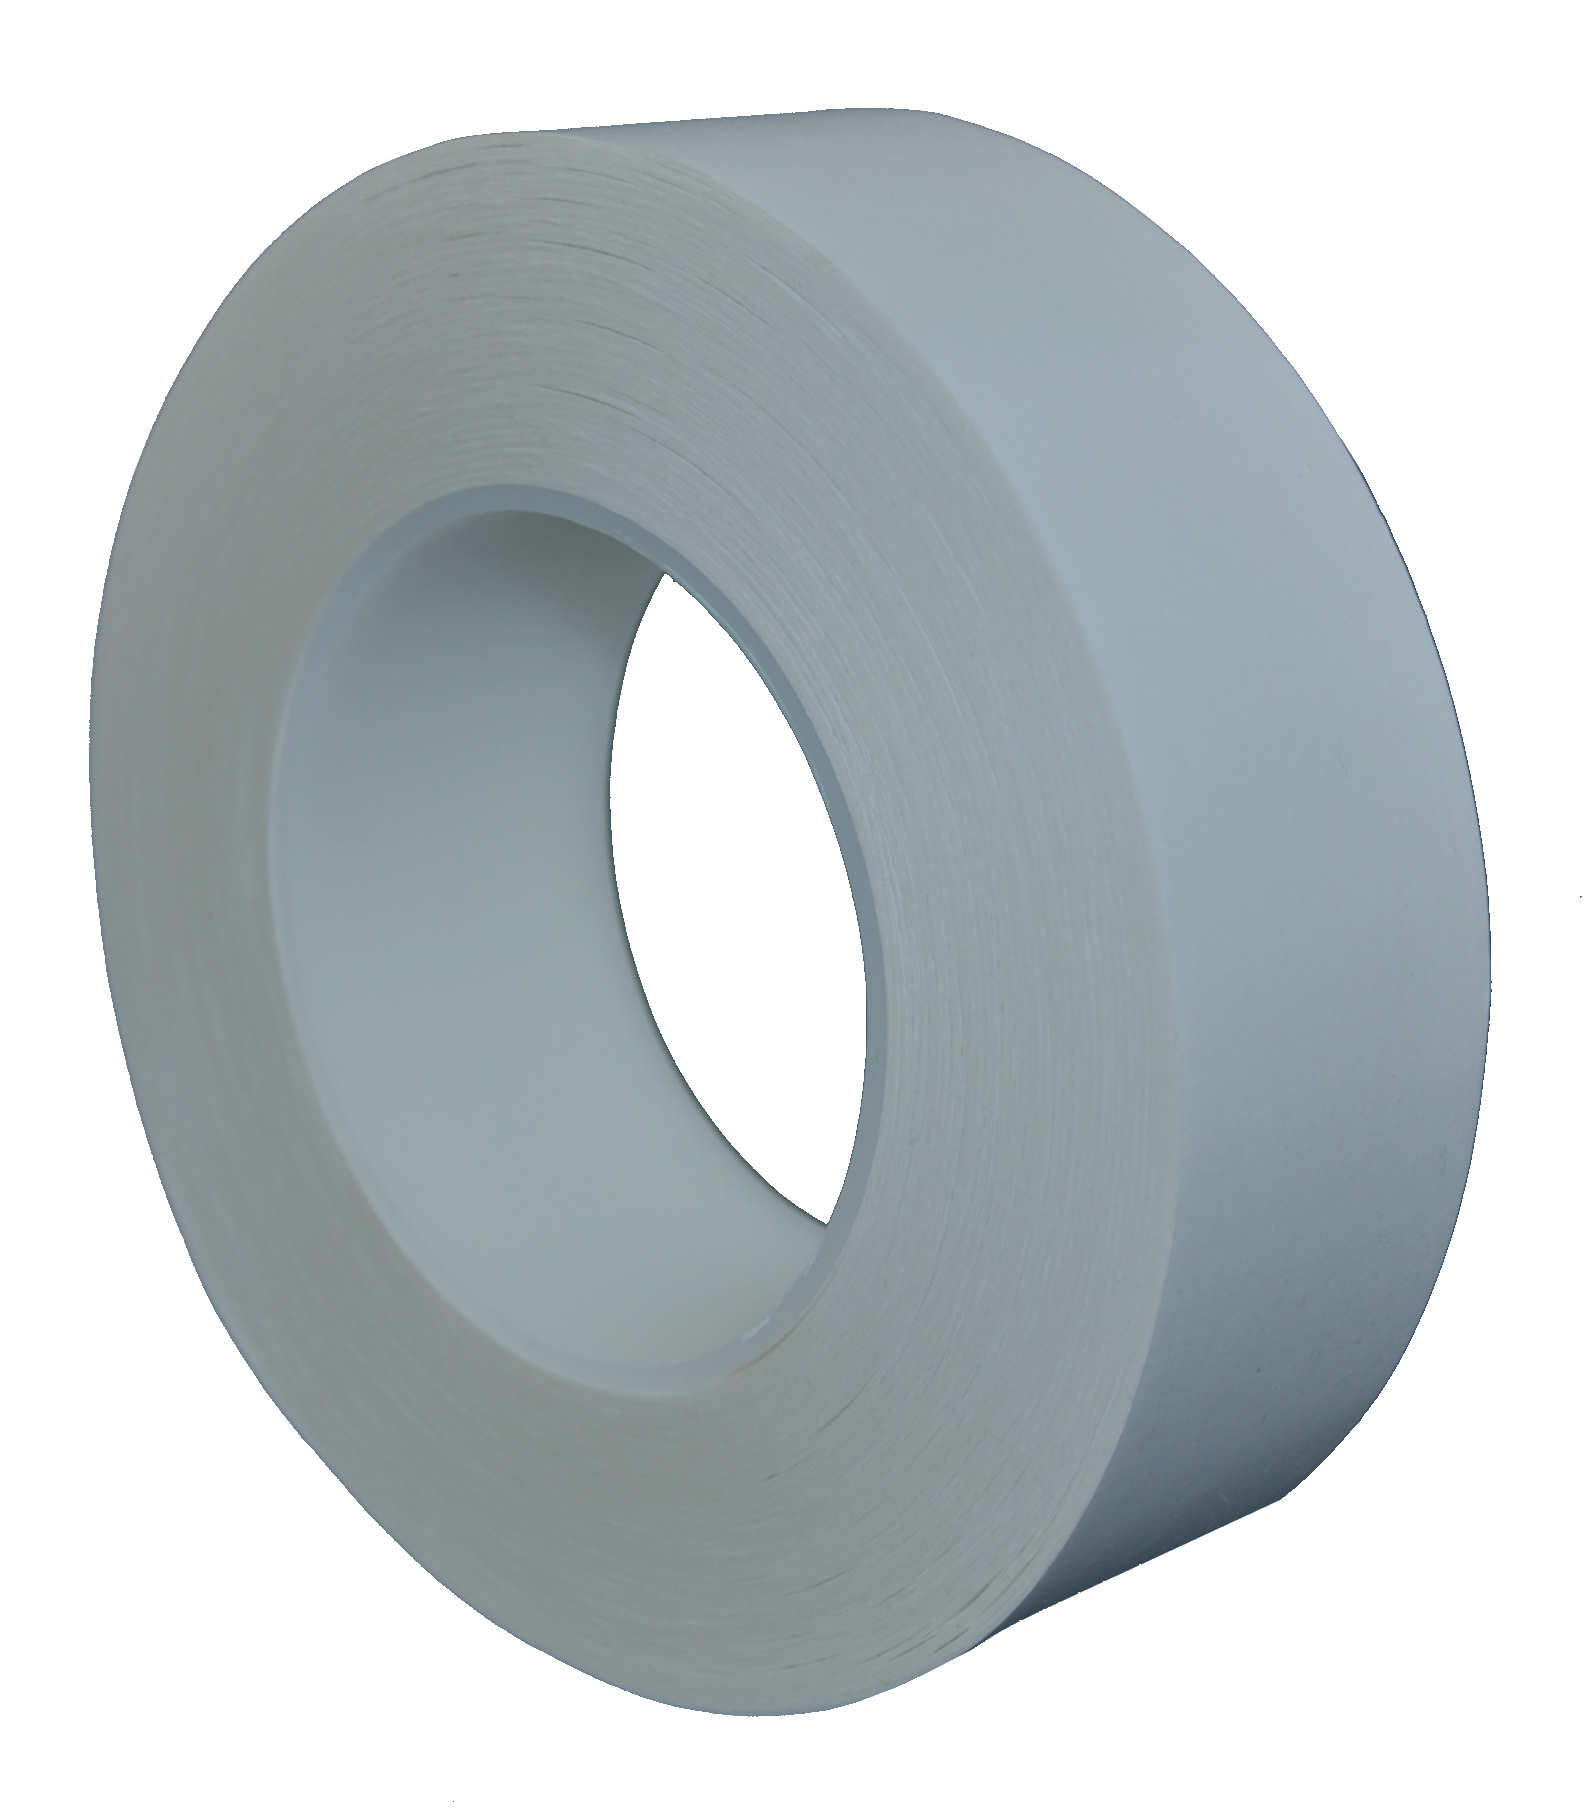 S-K-S dubbelzijdig plakband met polyester drager 480, transparant, 38 mm x 50 m, 0,09 mm